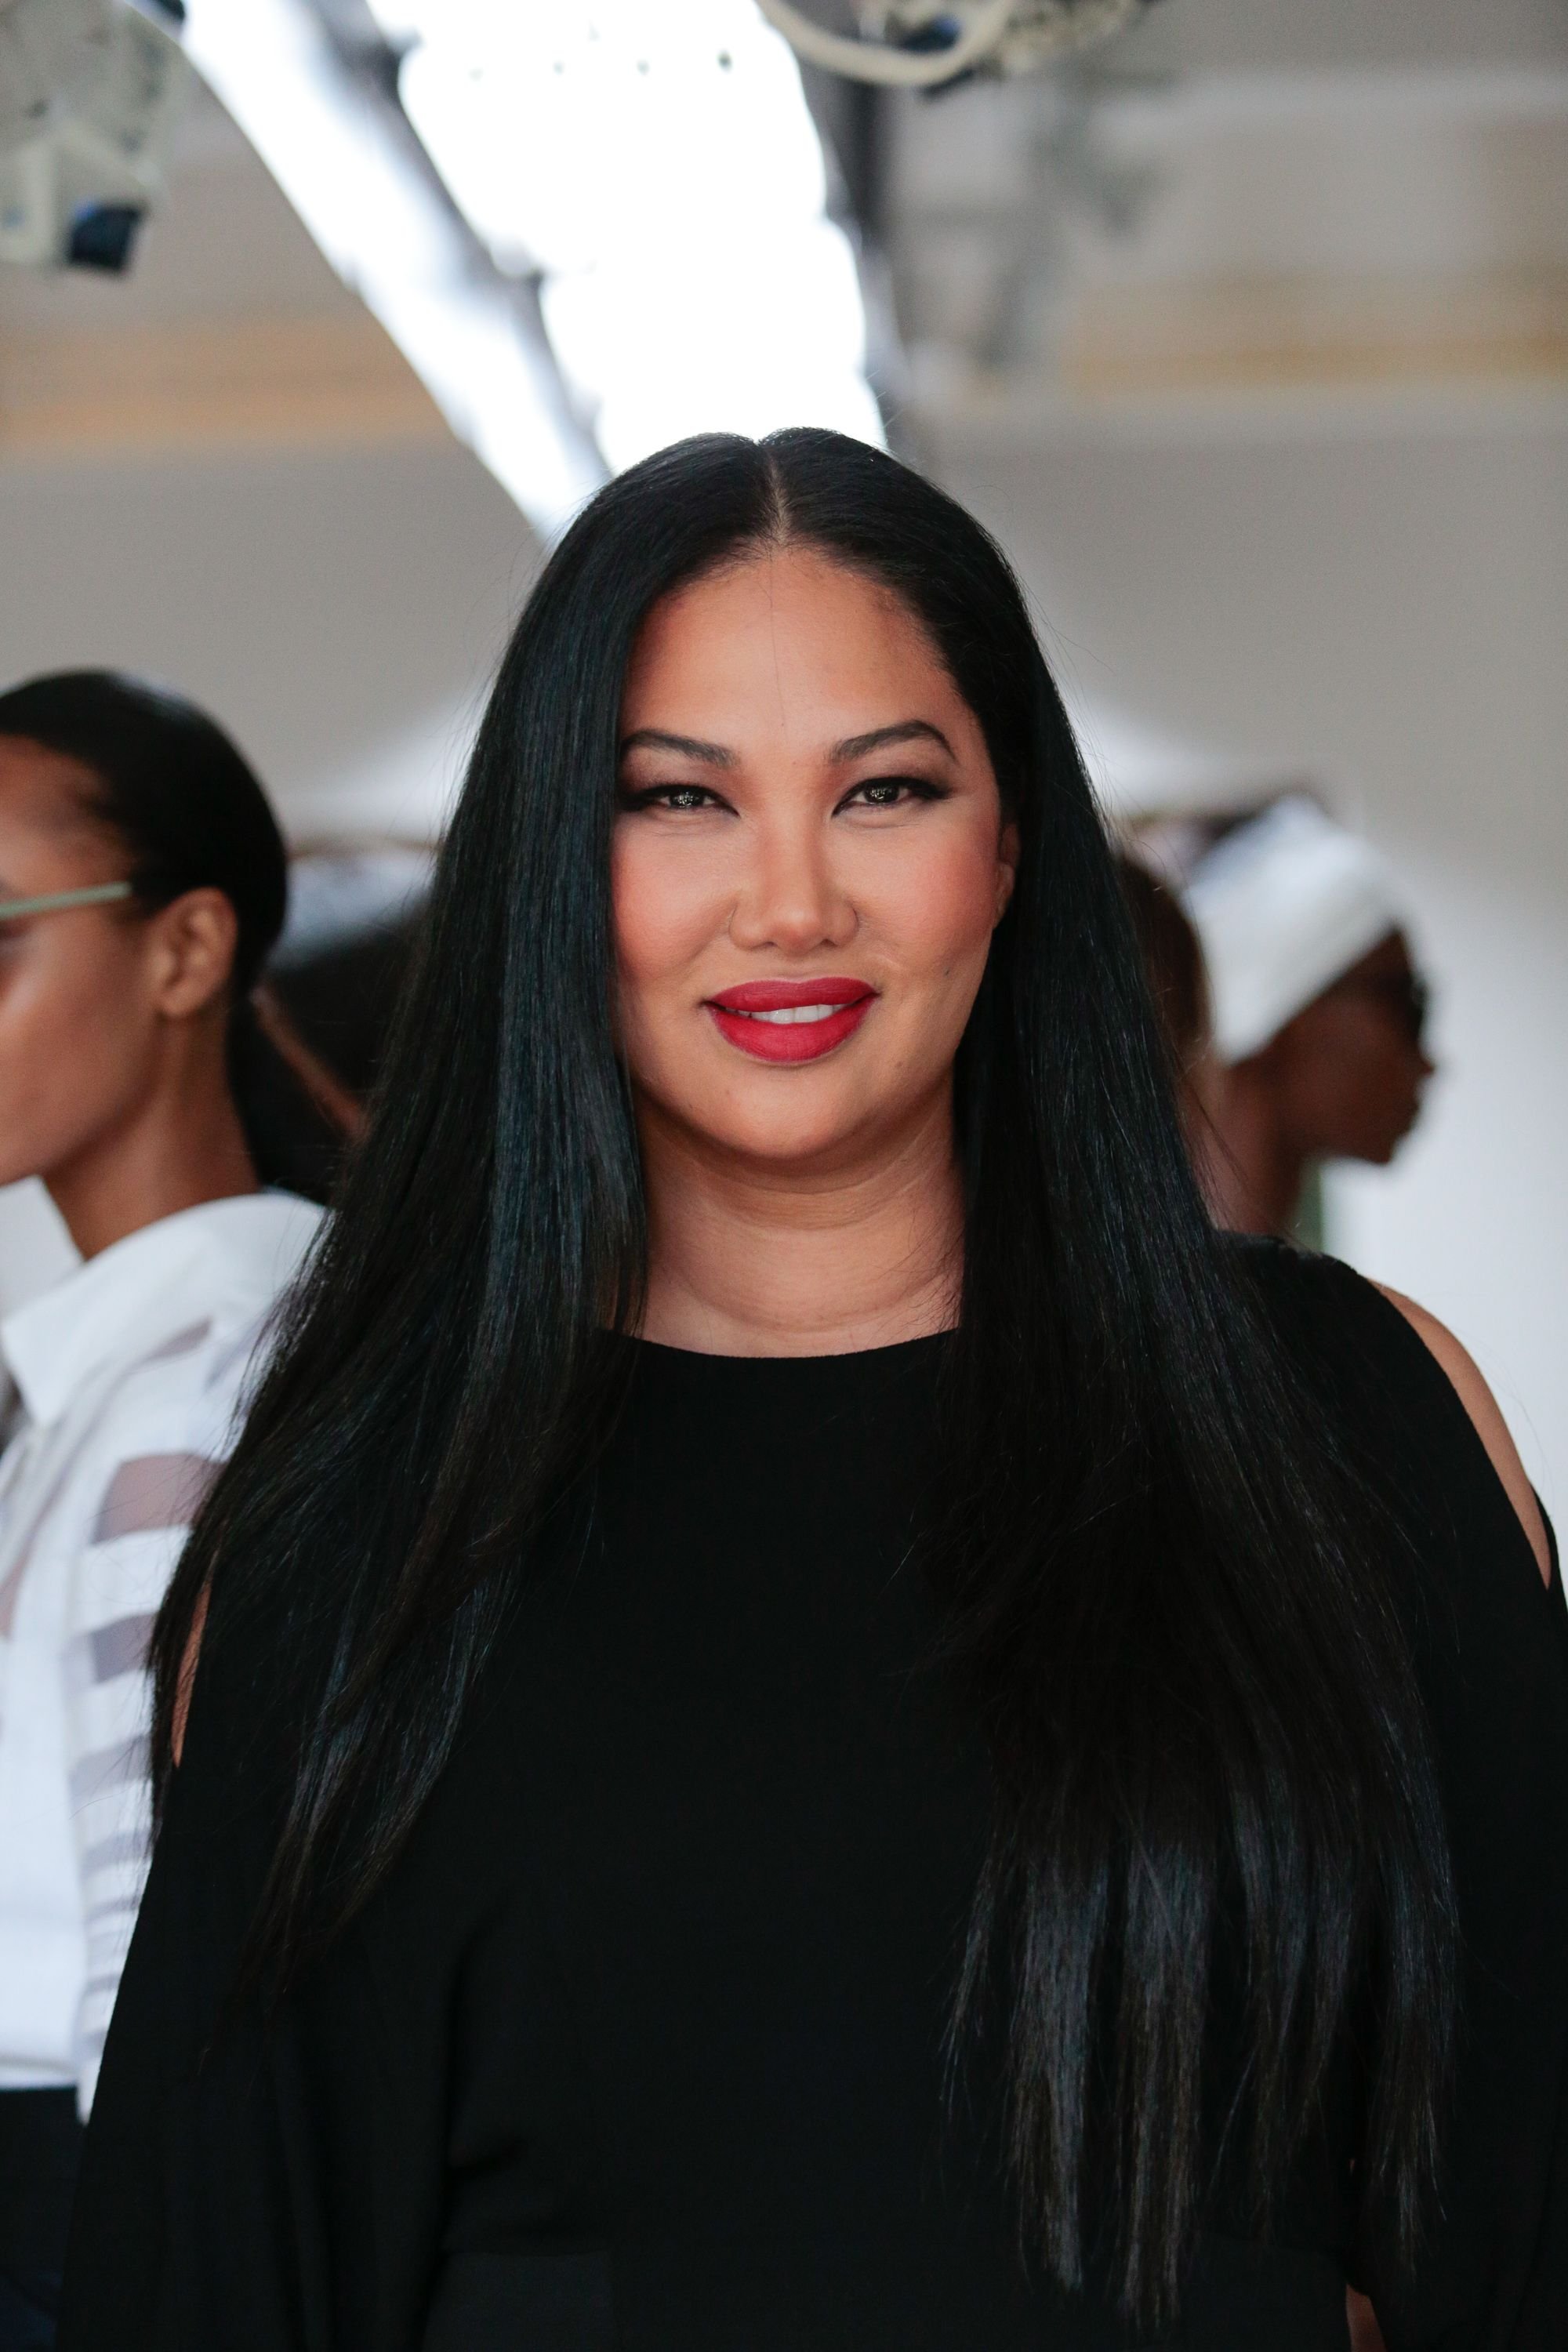 Kimora Lee Simmons during New York Fashion Week at The Gallery, Skylight at Clarkson Sq on September 14, 2016 | Photo: Getty Image